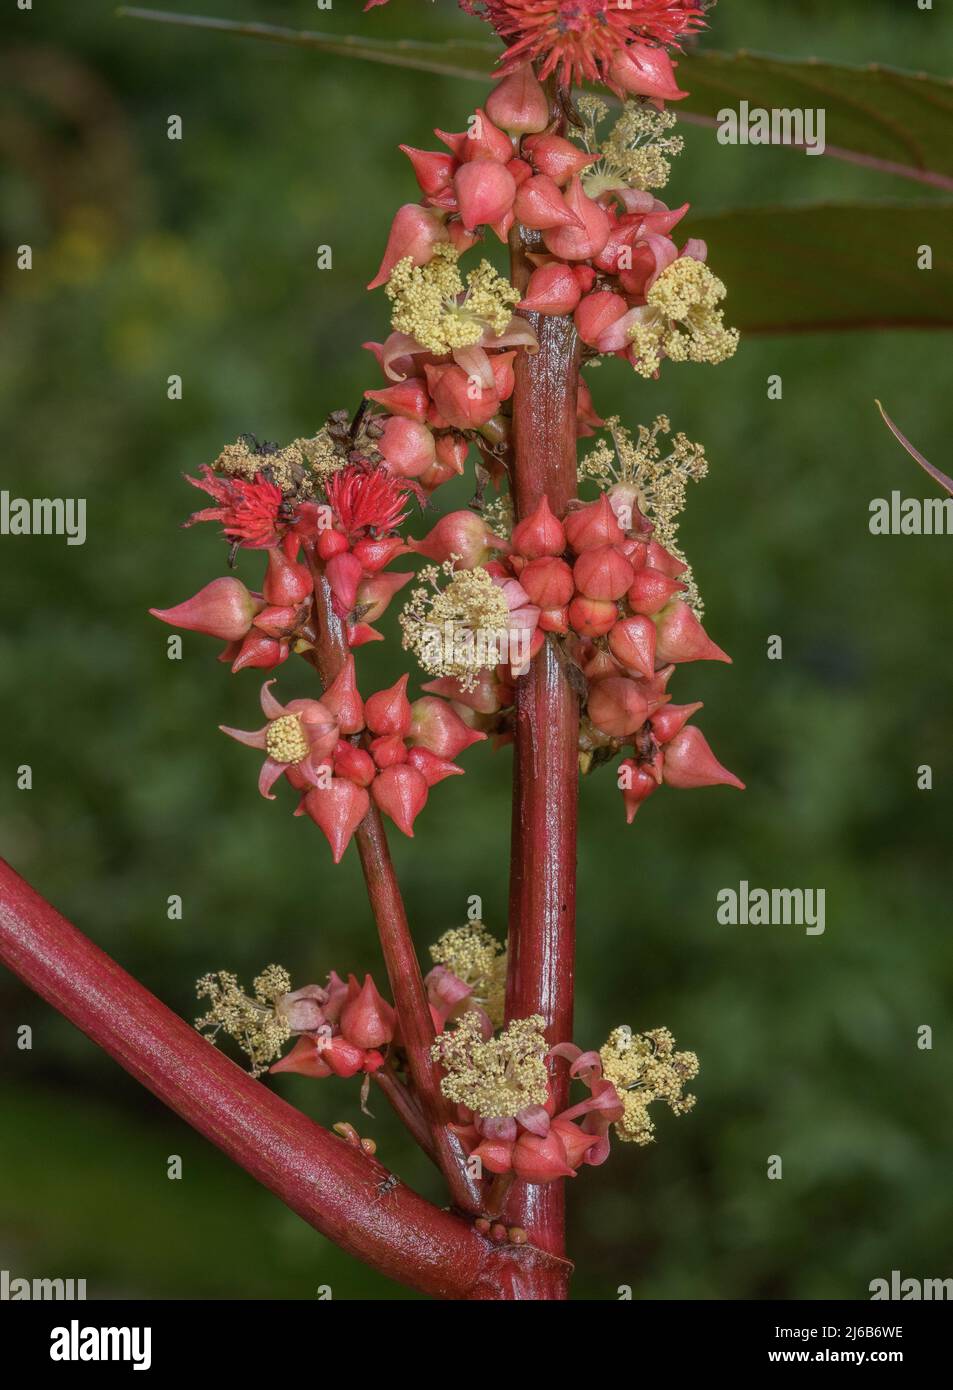 Castor oil plant, Ricinus communis, with male and female flowers. Stock Photo